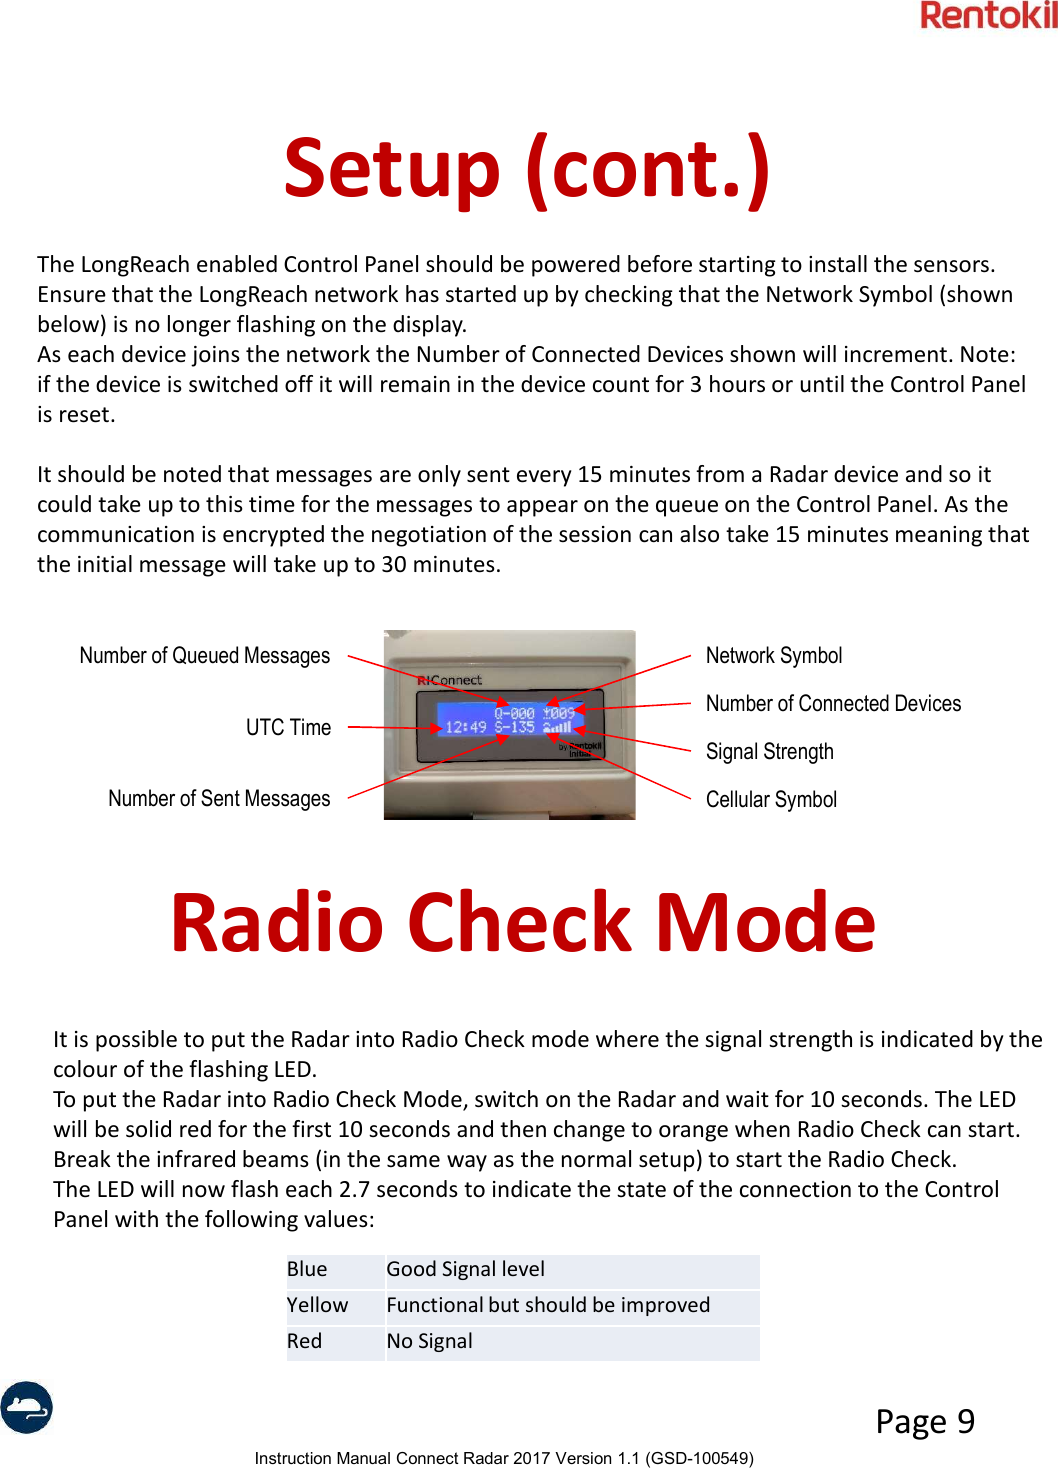 Instruction Manual Connect Radar 2017 Version 1.1 (GSD-100549)Page 9Radio Check ModeSetup (cont.)The LongReach enabled Control Panel should be powered before starting to install the sensors. Ensure that the LongReach network has started up by checking that the Network Symbol (shown below) is no longer flashing on the display. As each device joins the network the Number of Connected Devices shown will increment. Note: if the device is switched off it will remain in the device count for 3 hours or until the Control Panel is reset.It should be noted that messages are only sent every 15 minutes from a Radar device and so it could take up to this time for the messages to appear on the queue on the Control Panel. As the communication is encrypted the negotiation of the session can also take 15 minutes meaning that the initial message will take up to 30 minutes.It is possible to put the Radar into Radio Check mode where the signal strength is indicated by the colour of the flashing LED. To put the Radar into Radio Check Mode, switch on the Radar and wait for 10 seconds. The LED will be solid red for the first 10 seconds and then change to orange when Radio Check can start.Break the infrared beams (in the same way as the normal setup) to start the Radio Check.The LED will now flash each 2.7 seconds to indicate the state of the connection to the Control Panel with the following values:Network SymbolNumber of Connected DevicesSignal StrengthCellular SymbolUTC TimeNumber of Queued MessagesNumber of Sent MessagesBlue Good Signal levelYellow Functional but should be improvedRed No Signal